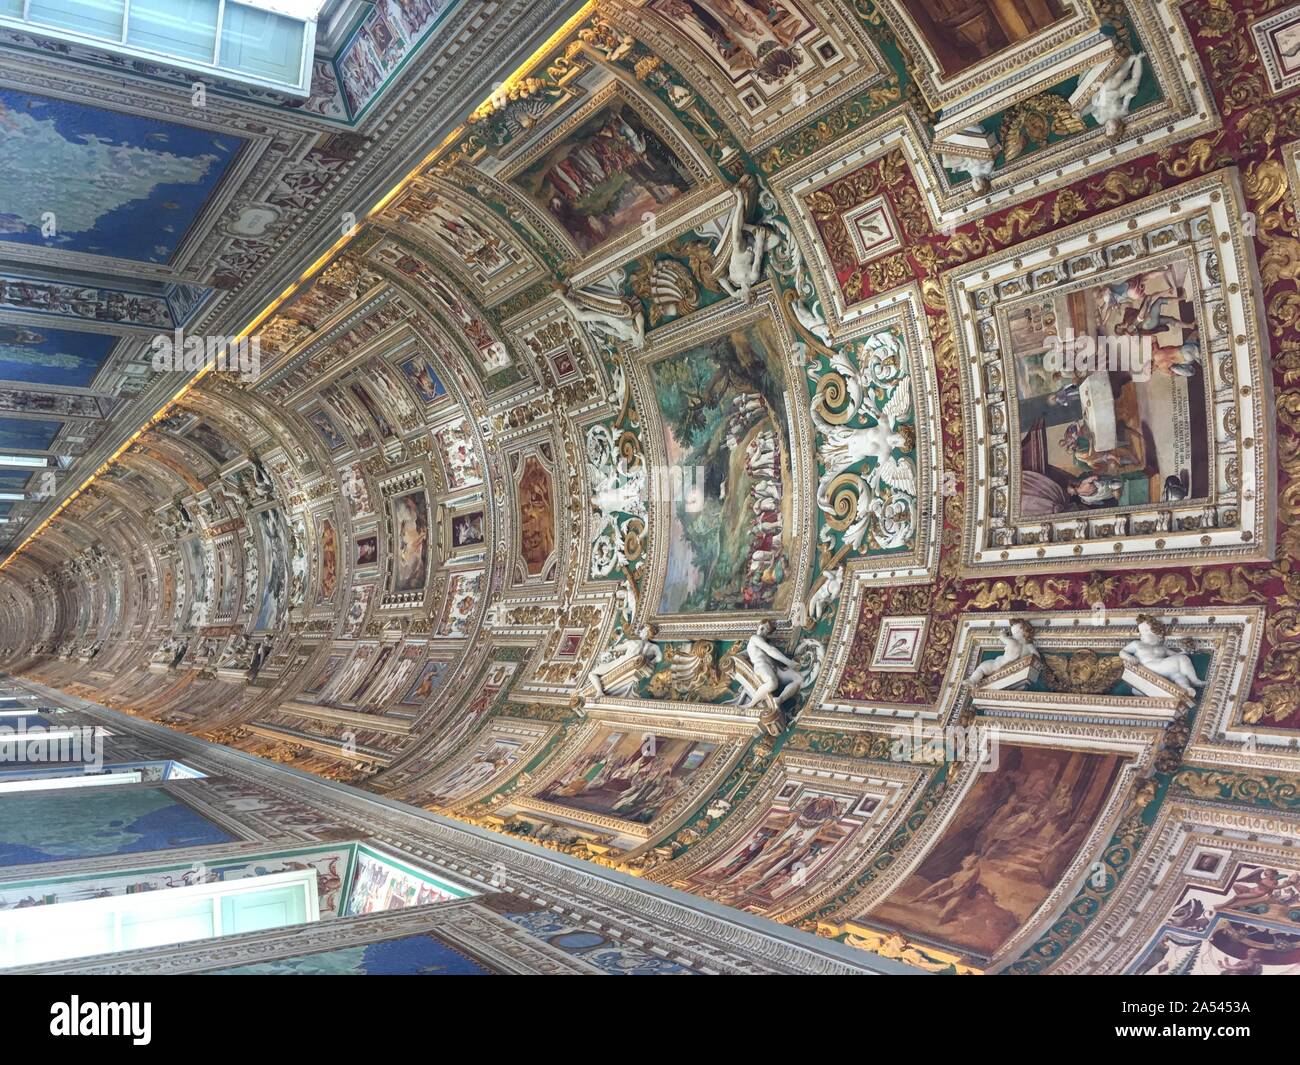 Vatican, Vatican, China. 18th Oct, 2019. The Vatican museum is the museum of the smallest country in the world.With a total area of 55,000 square meters, the museum, formerly the papal court, is mainly used for the collection and preservation of rare cultural relics and art treasures. Credit: SIPA Asia/ZUMA Wire/Alamy Live News Stock Photo